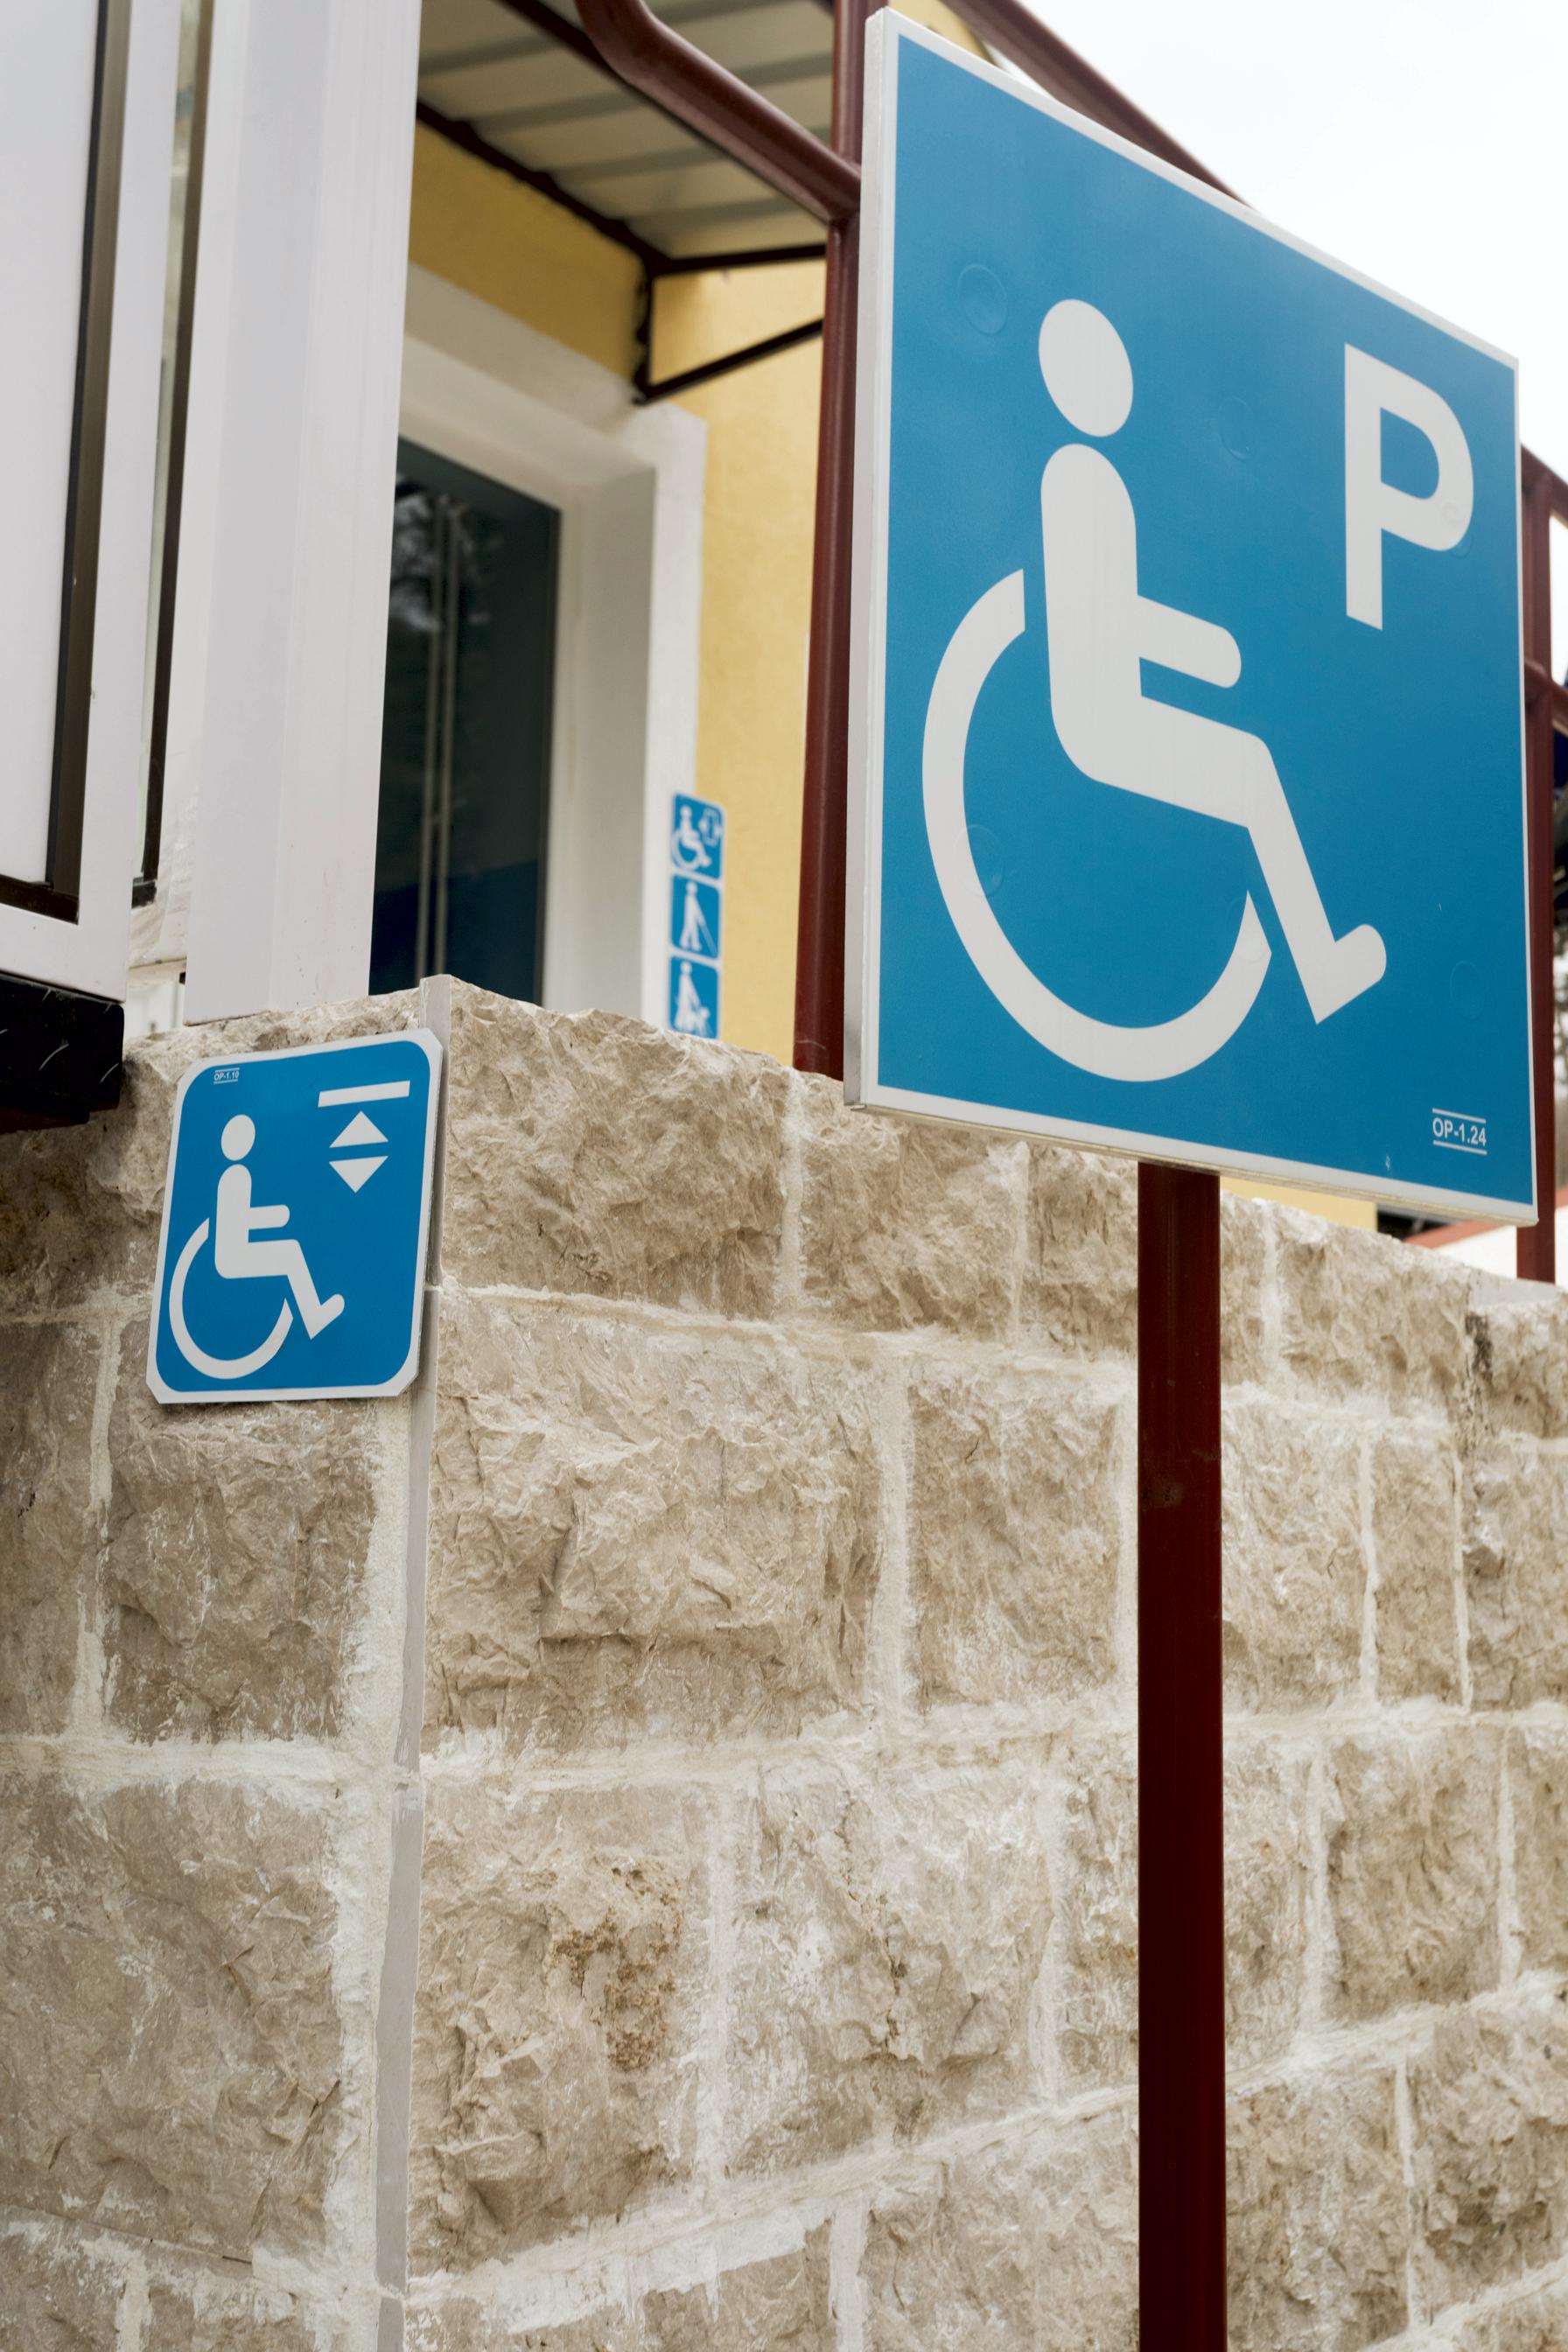 Accessibility signs Alu